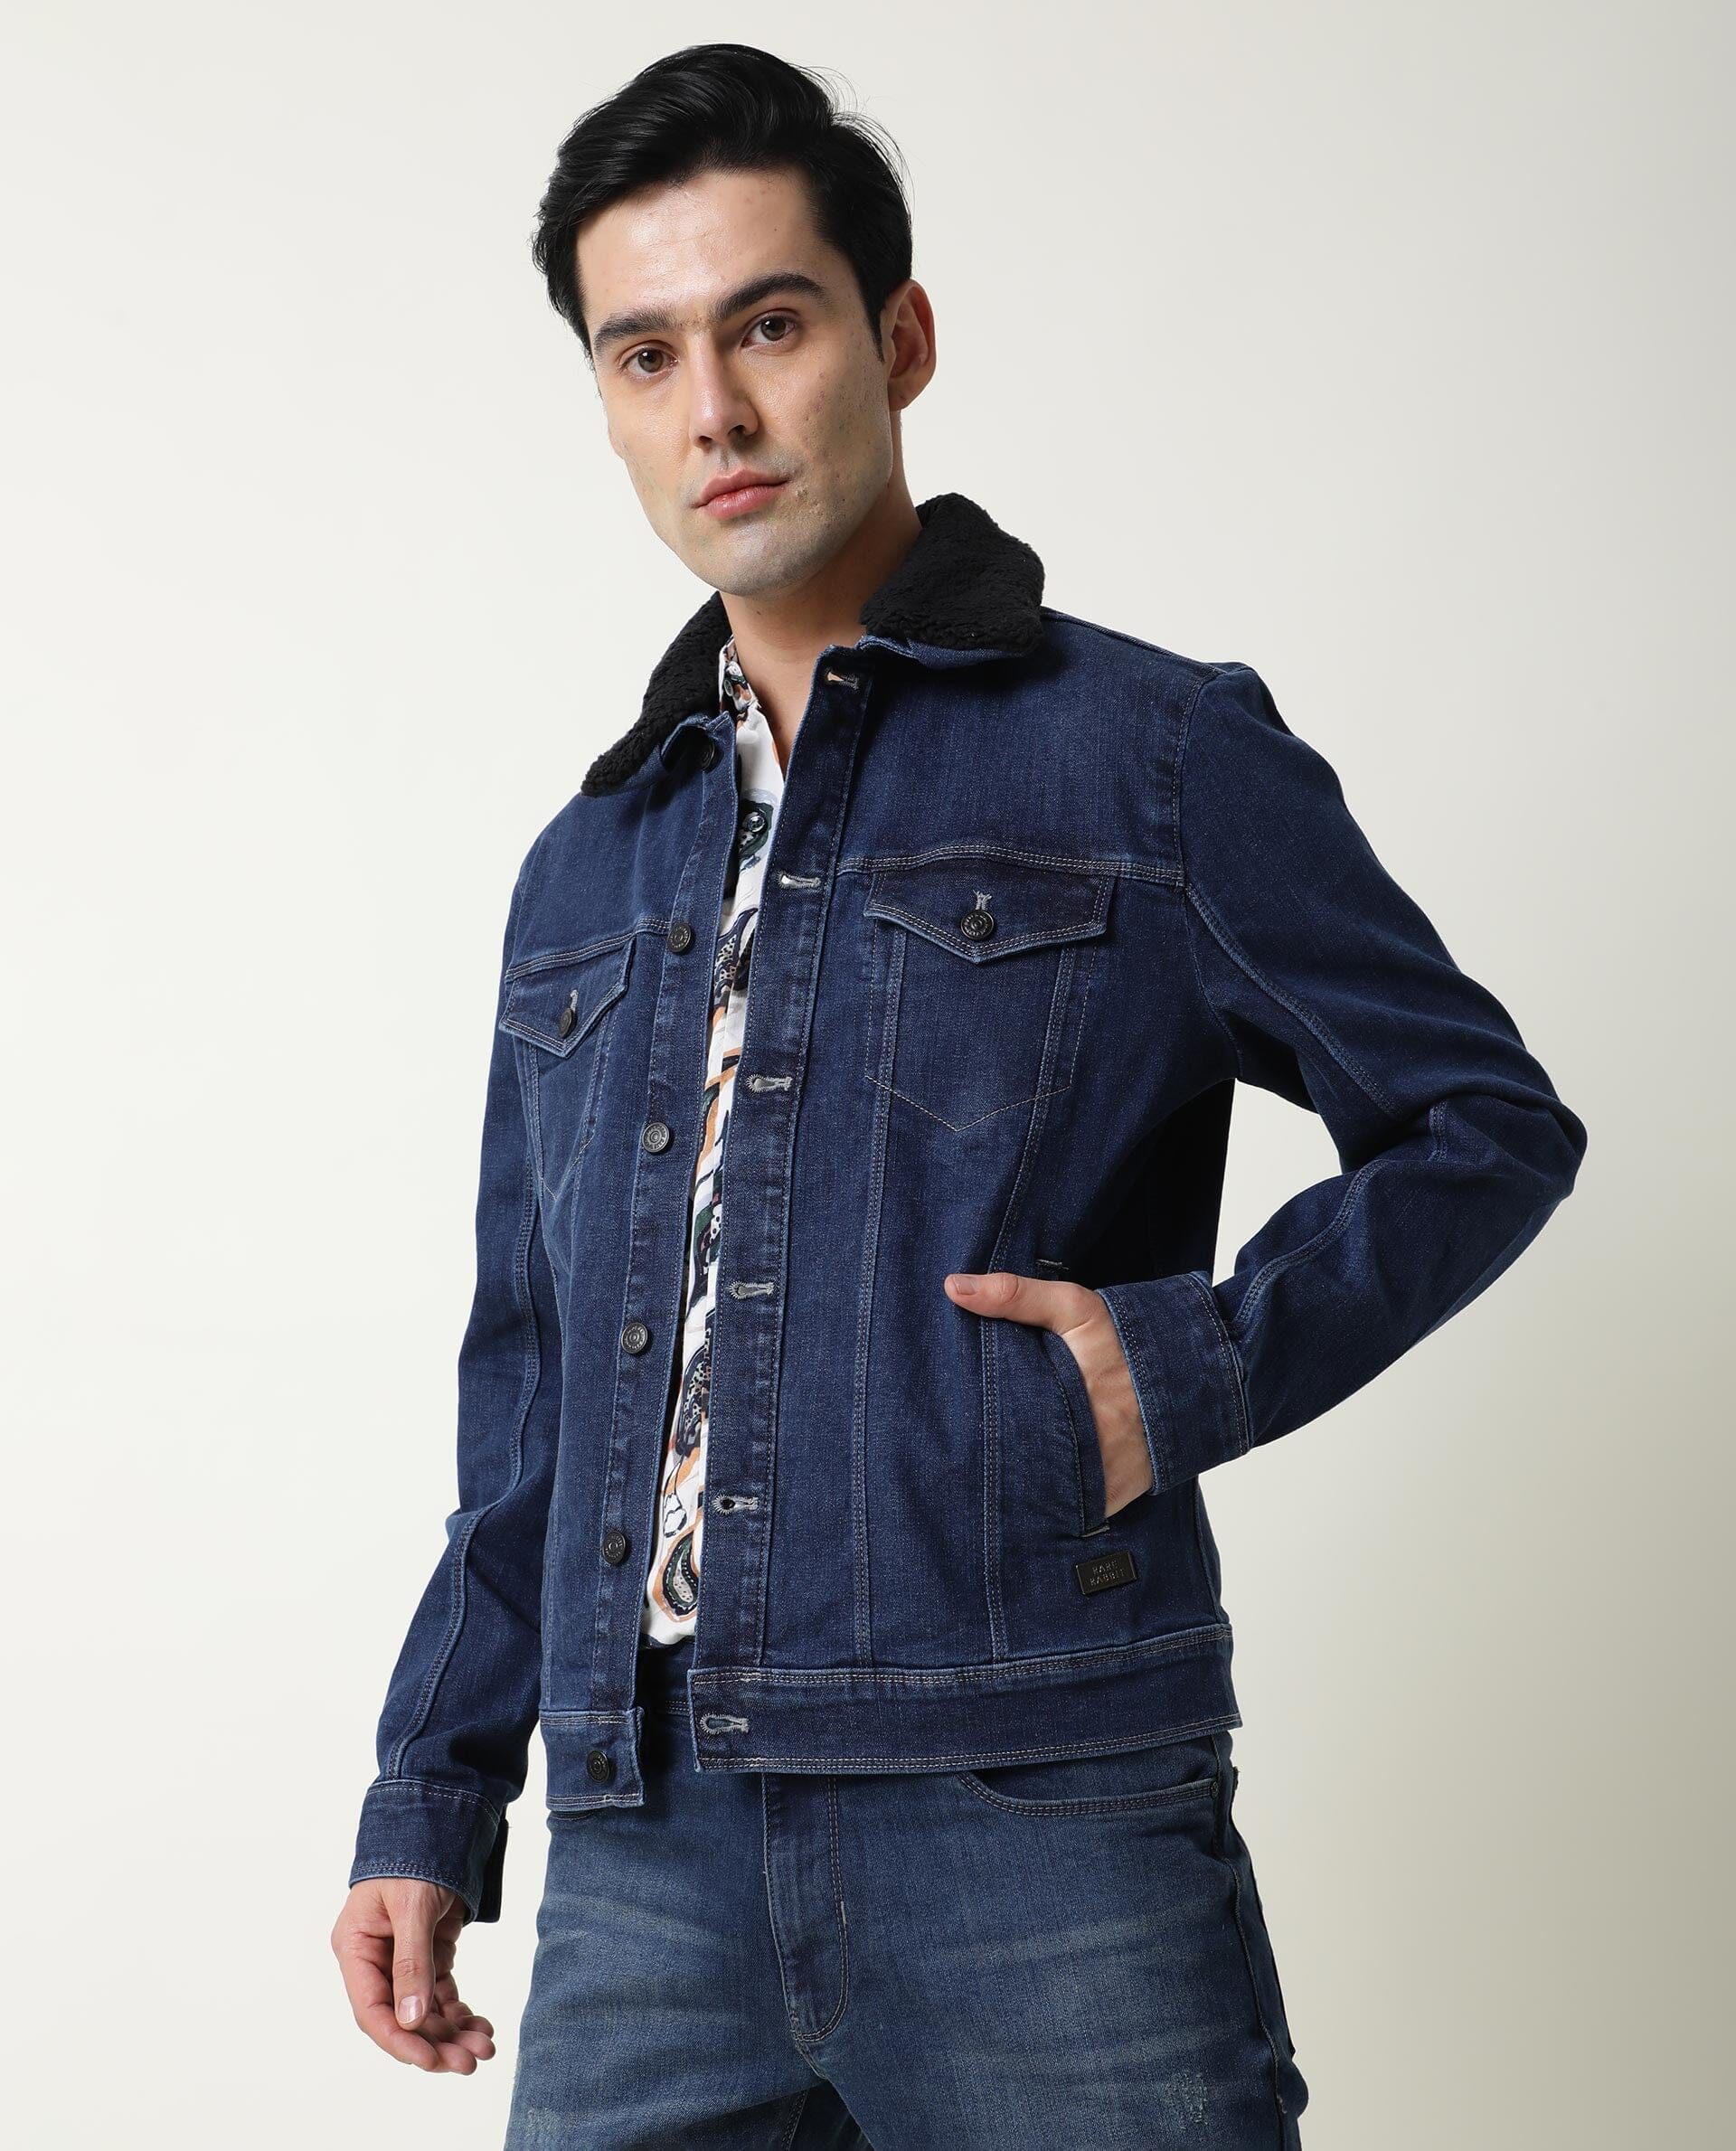 The New Rules Of Double Denim | FashionBeans | Leather jacket outfit men,  Blue denim jacket, Blue jean jacket outfits